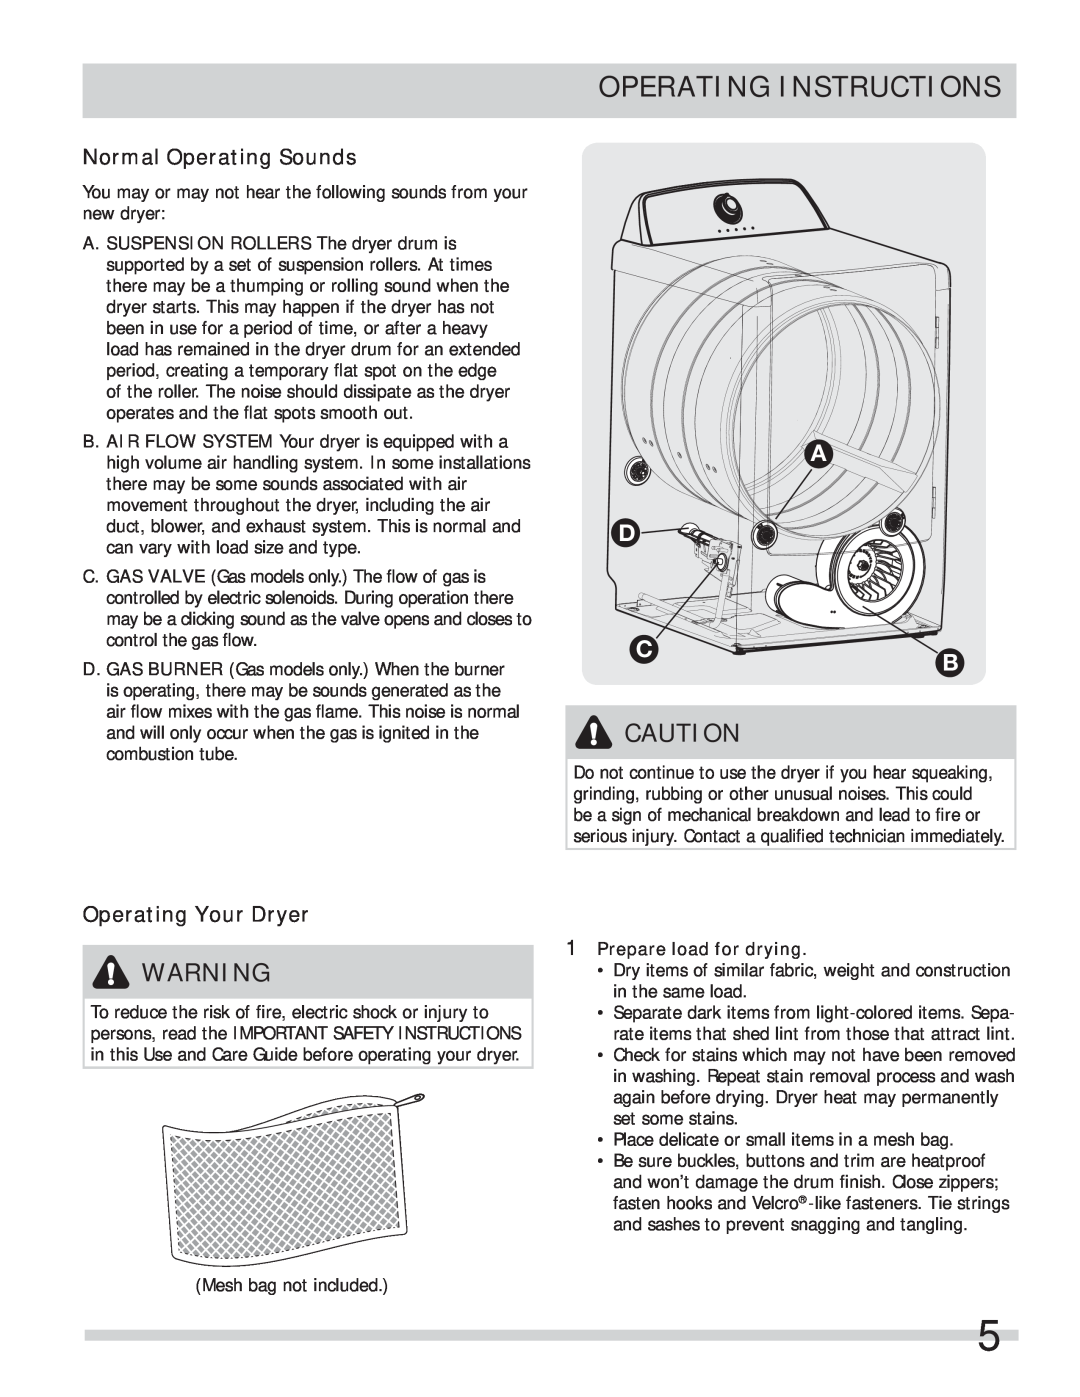 Frigidaire 137409900A(1111) Operating Instructions, Normal Operating Sounds, Operating Your Dryer, A D C B 